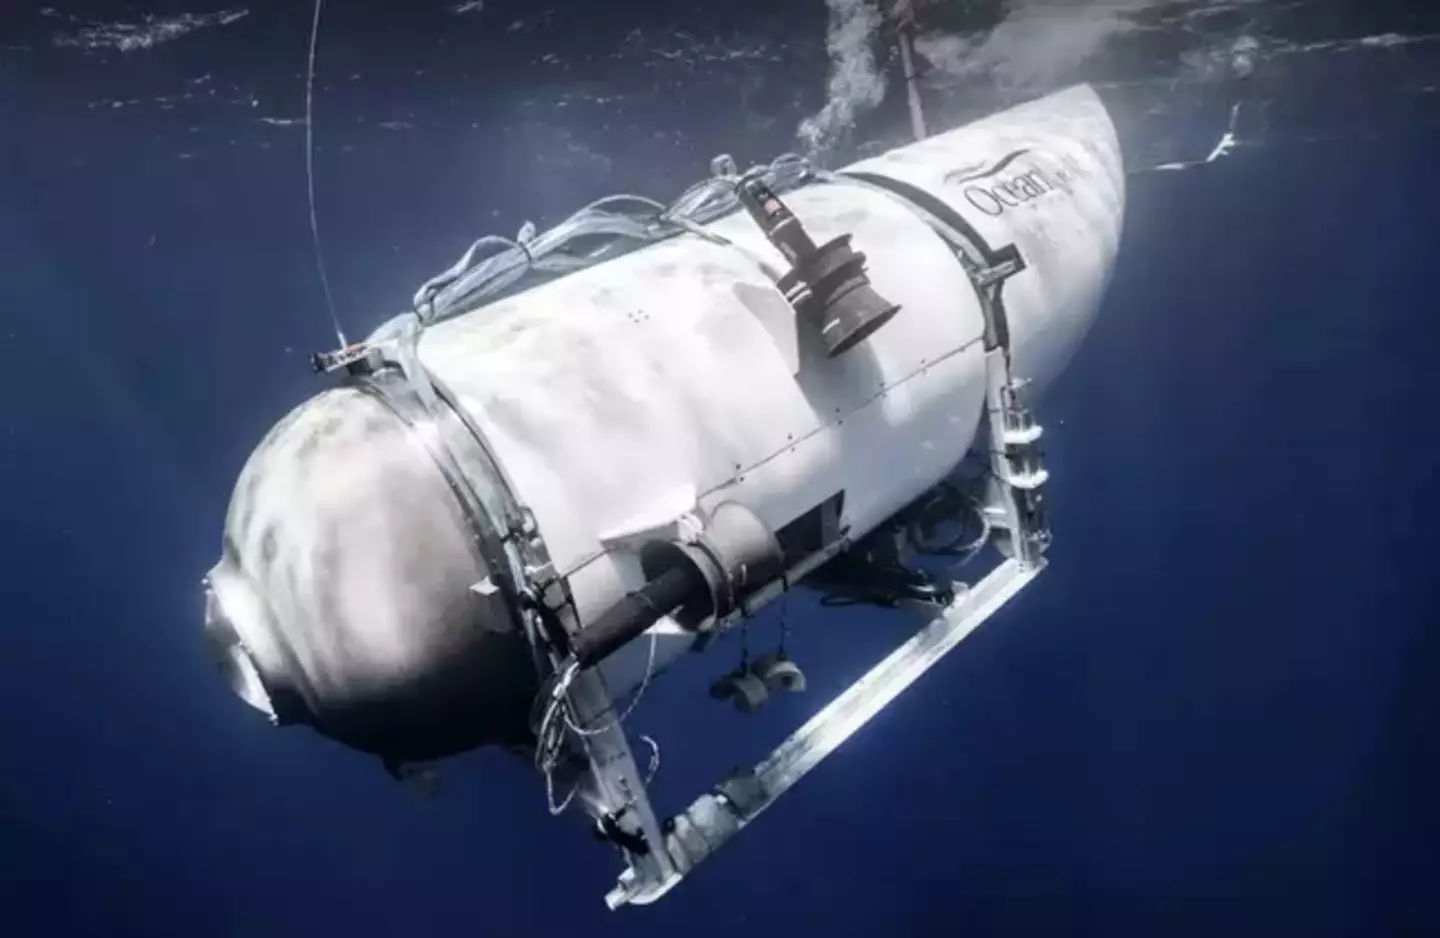 The Titan submersible imploded killing five people on board.